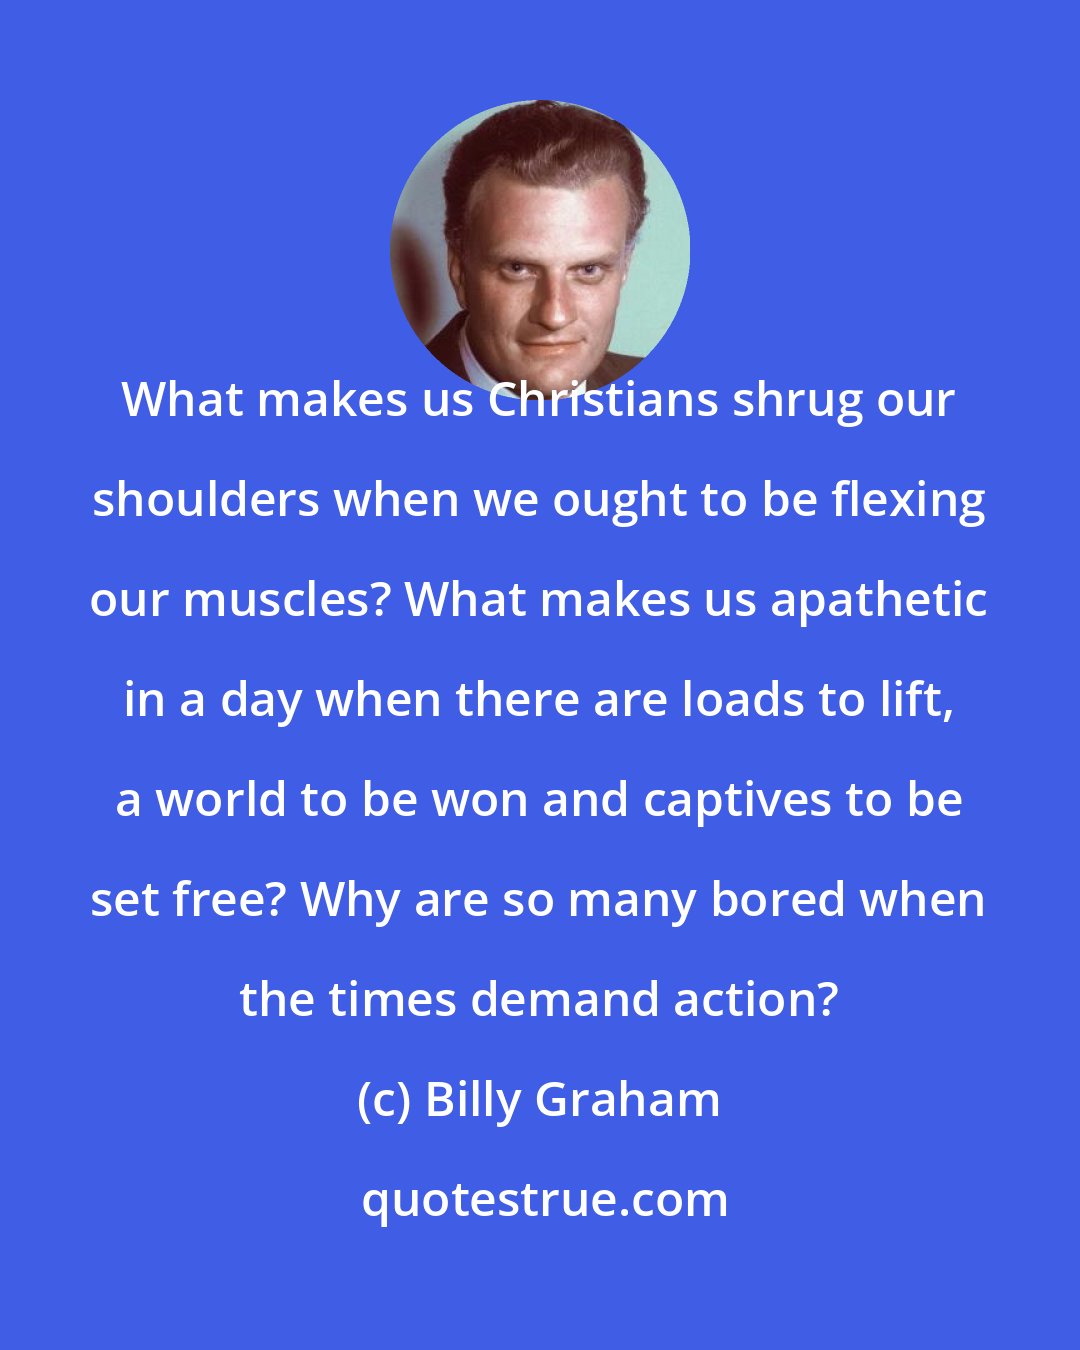 Billy Graham: What makes us Christians shrug our shoulders when we ought to be flexing our muscles? What makes us apathetic in a day when there are loads to lift, a world to be won and captives to be set free? Why are so many bored when the times demand action?